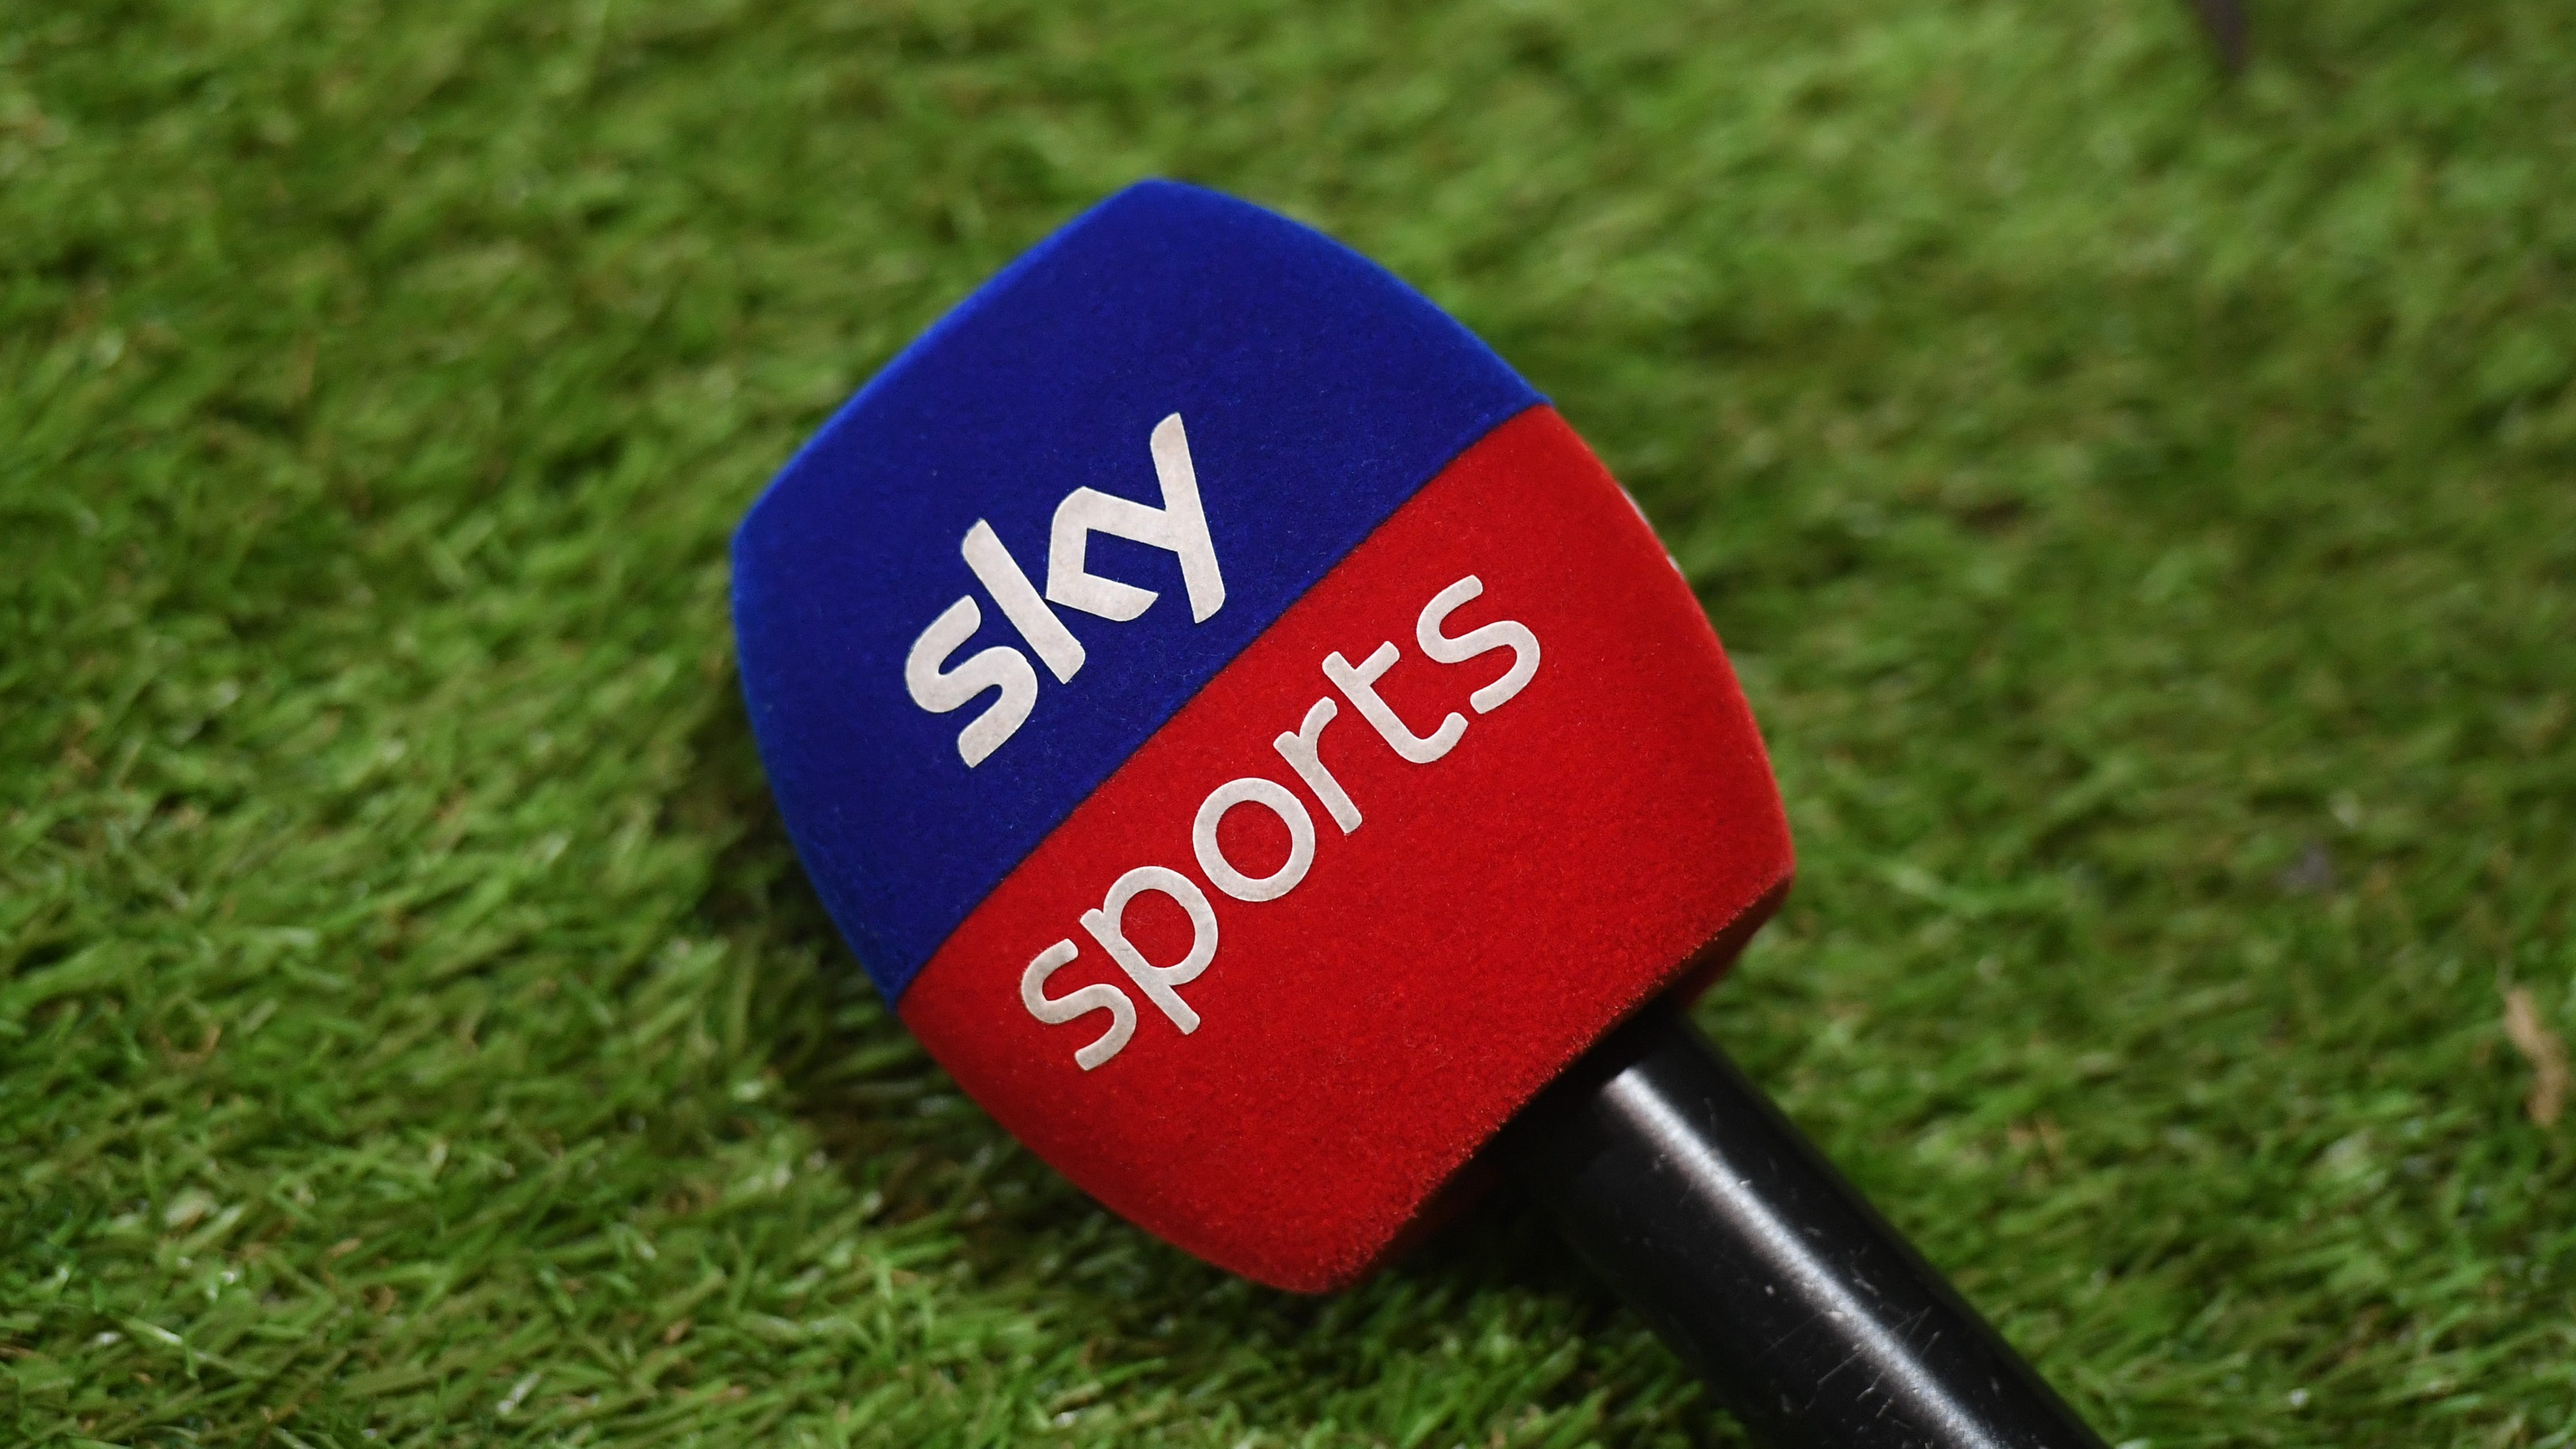 Best Sky Sports deals and offers for the 2023-24 football season Goal UK